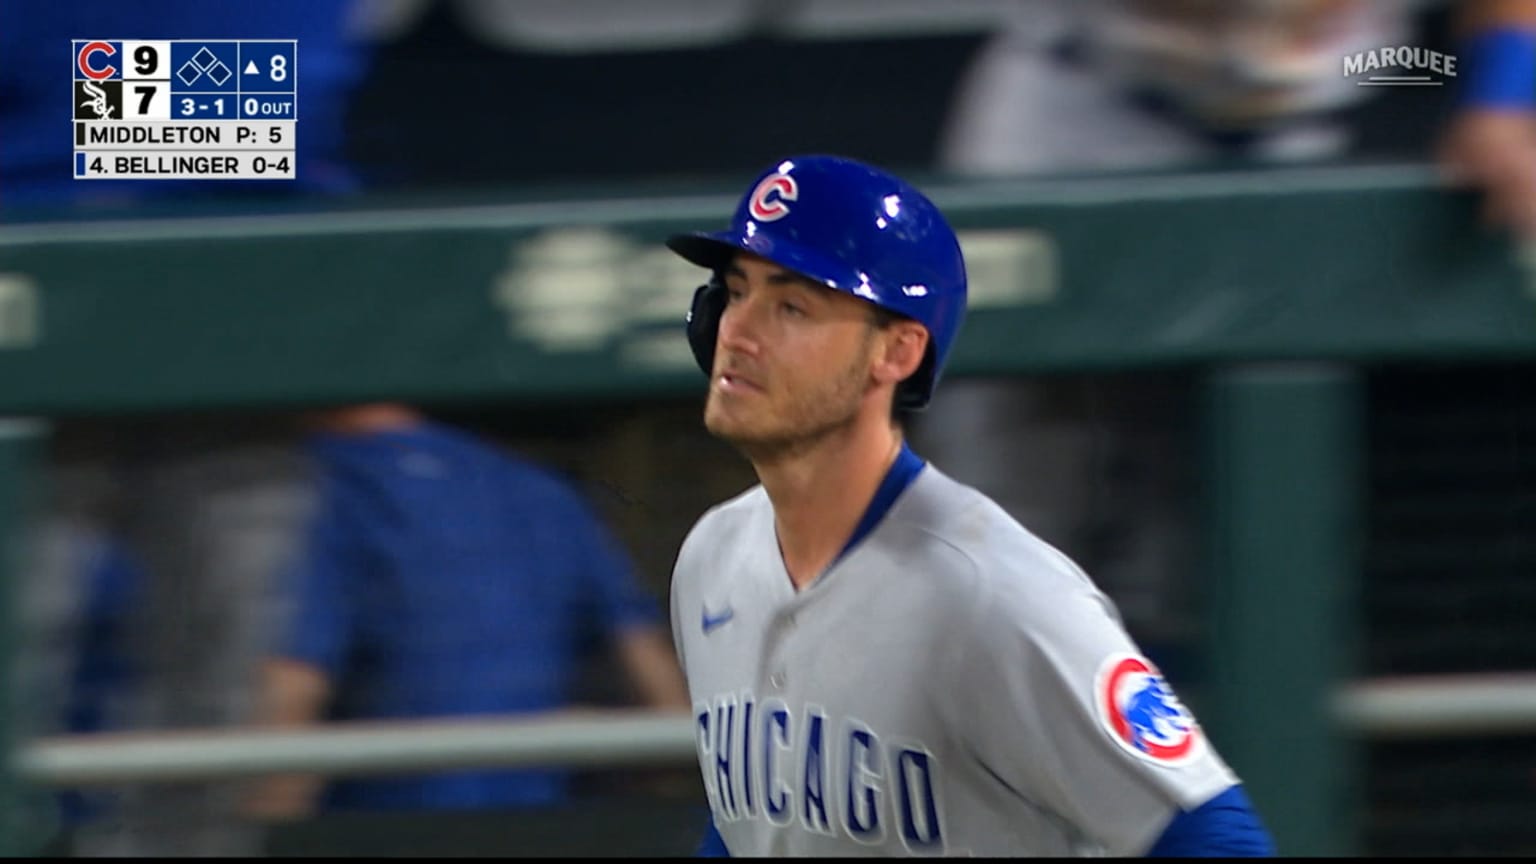 WATCH: Cubs' Ian Happ, Cody Bellinger back-to-back HRs vs. White